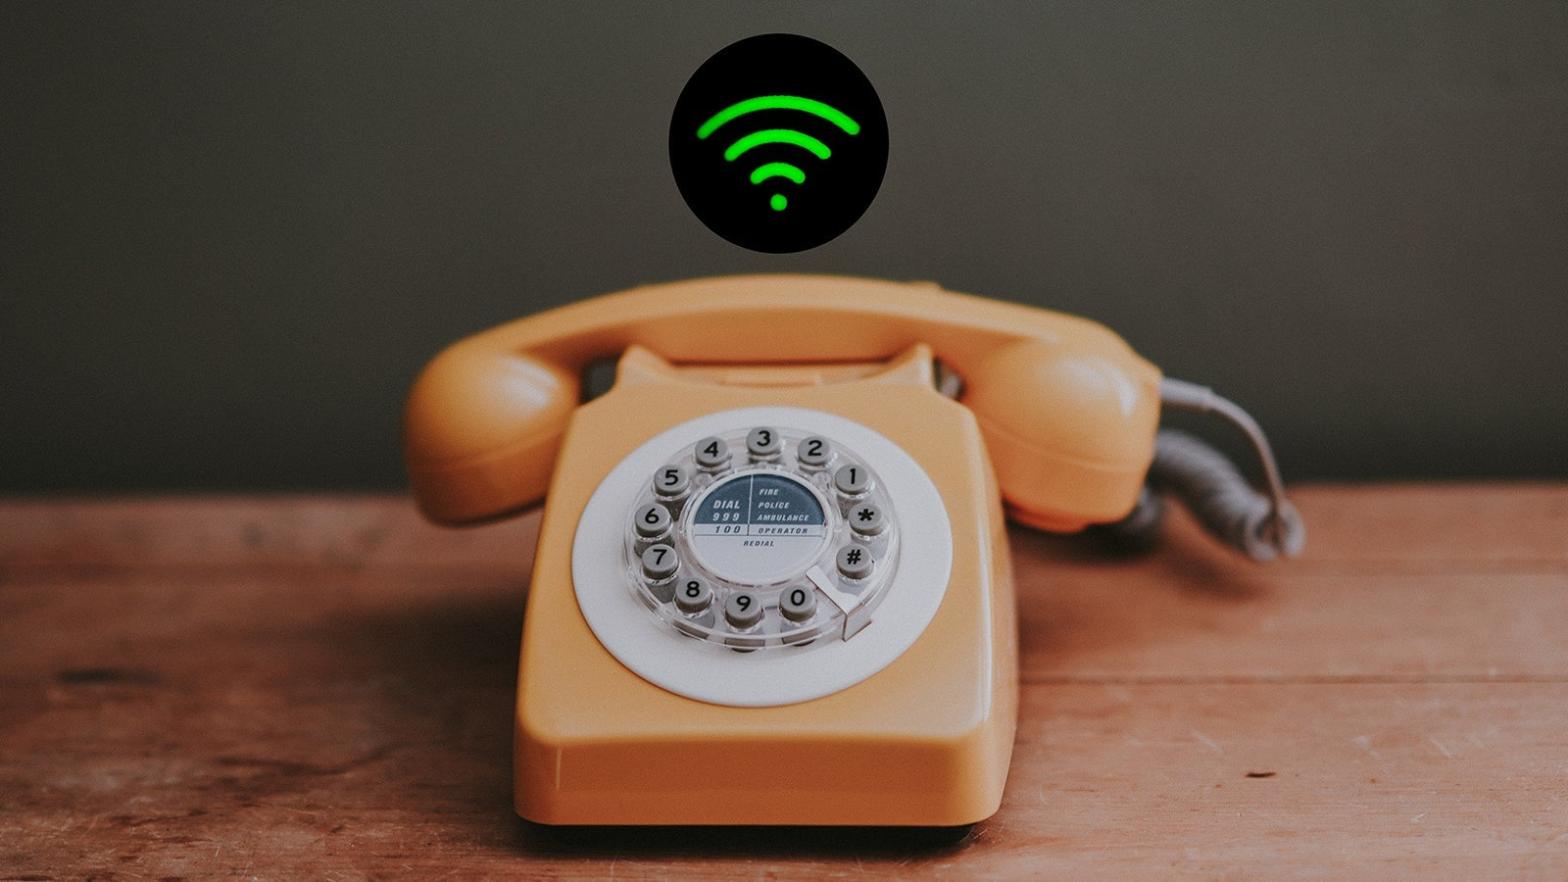 What Is Wifi Calling and How to Enable It on Your Phone